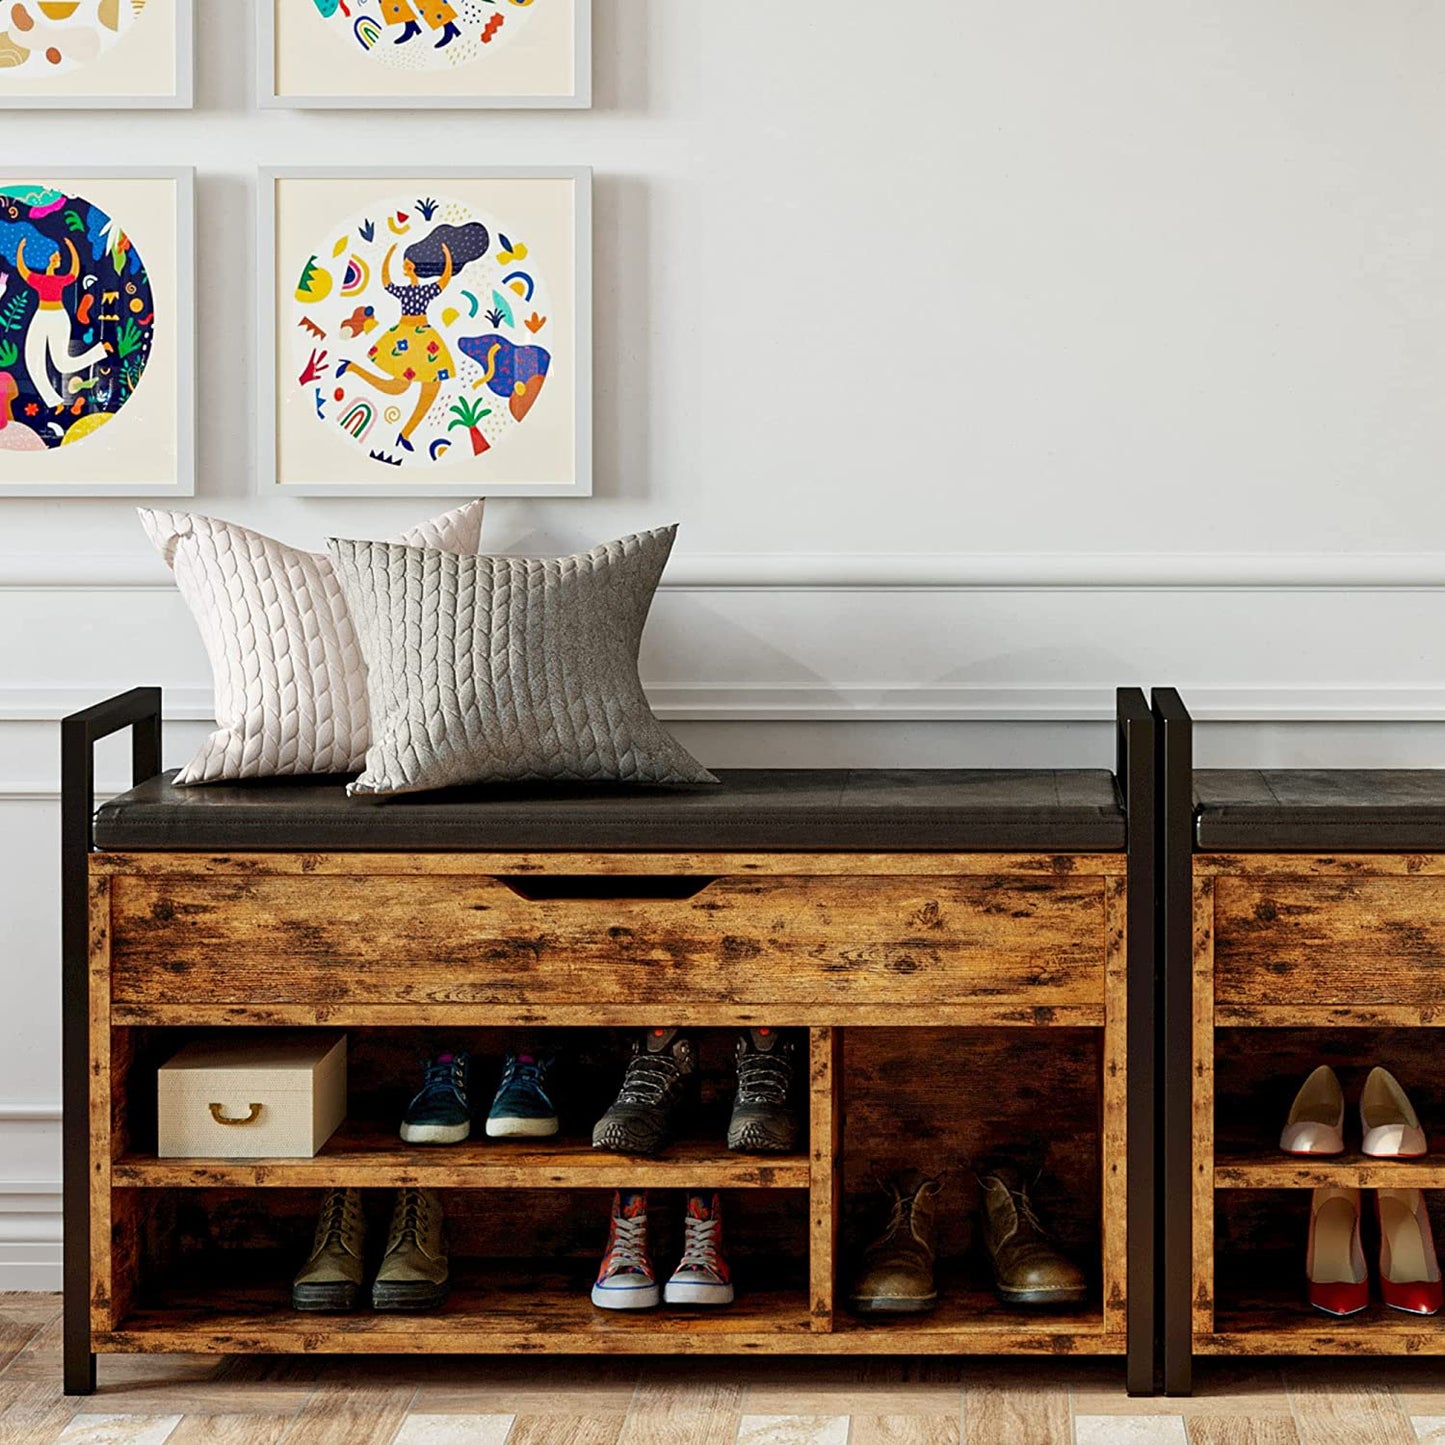 Shoe Storage Bench with Lift Top